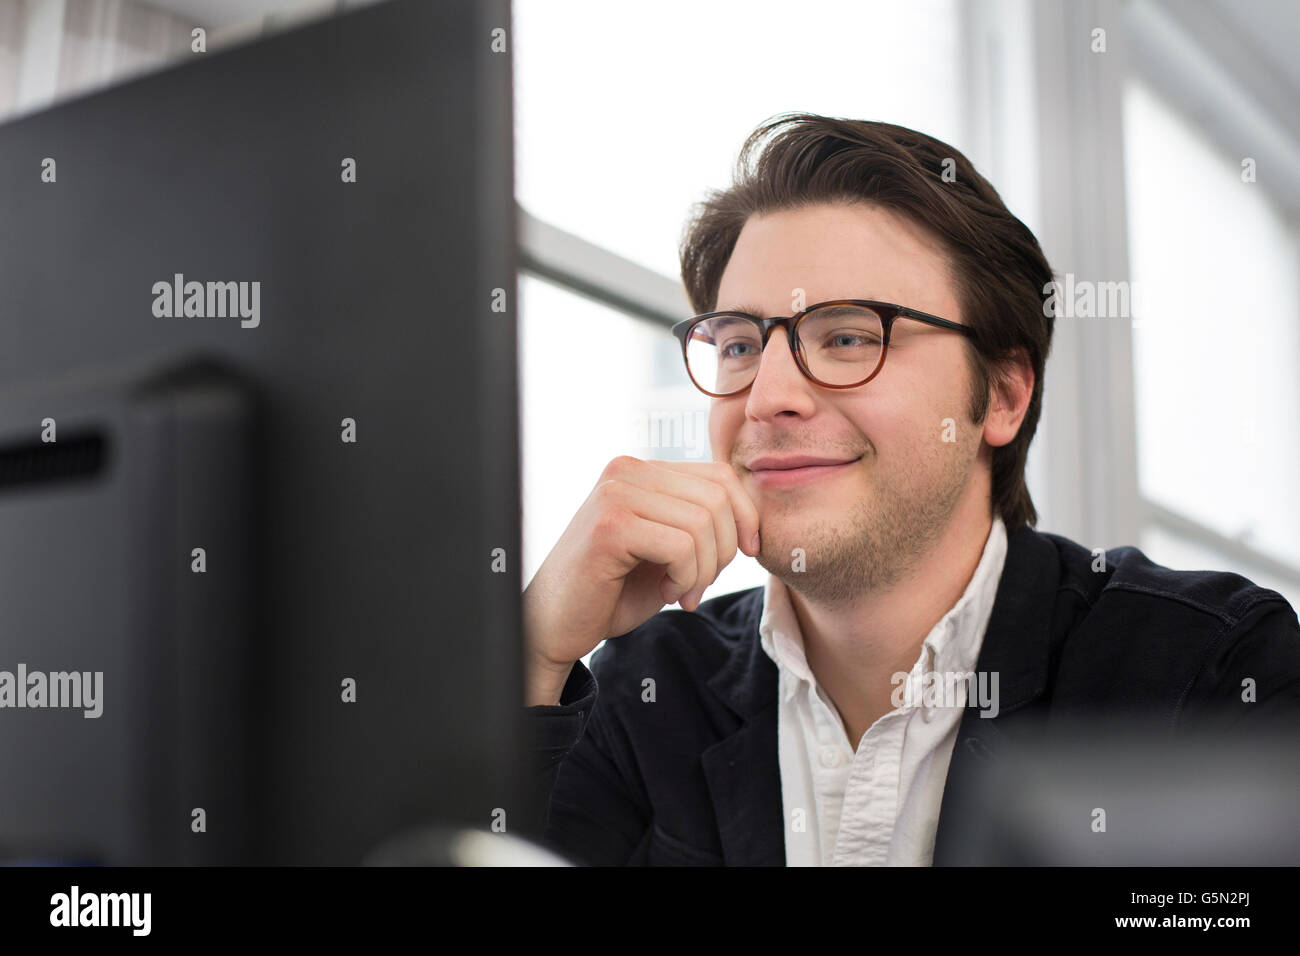 Caucasian businessman using computer in office Stock Photo